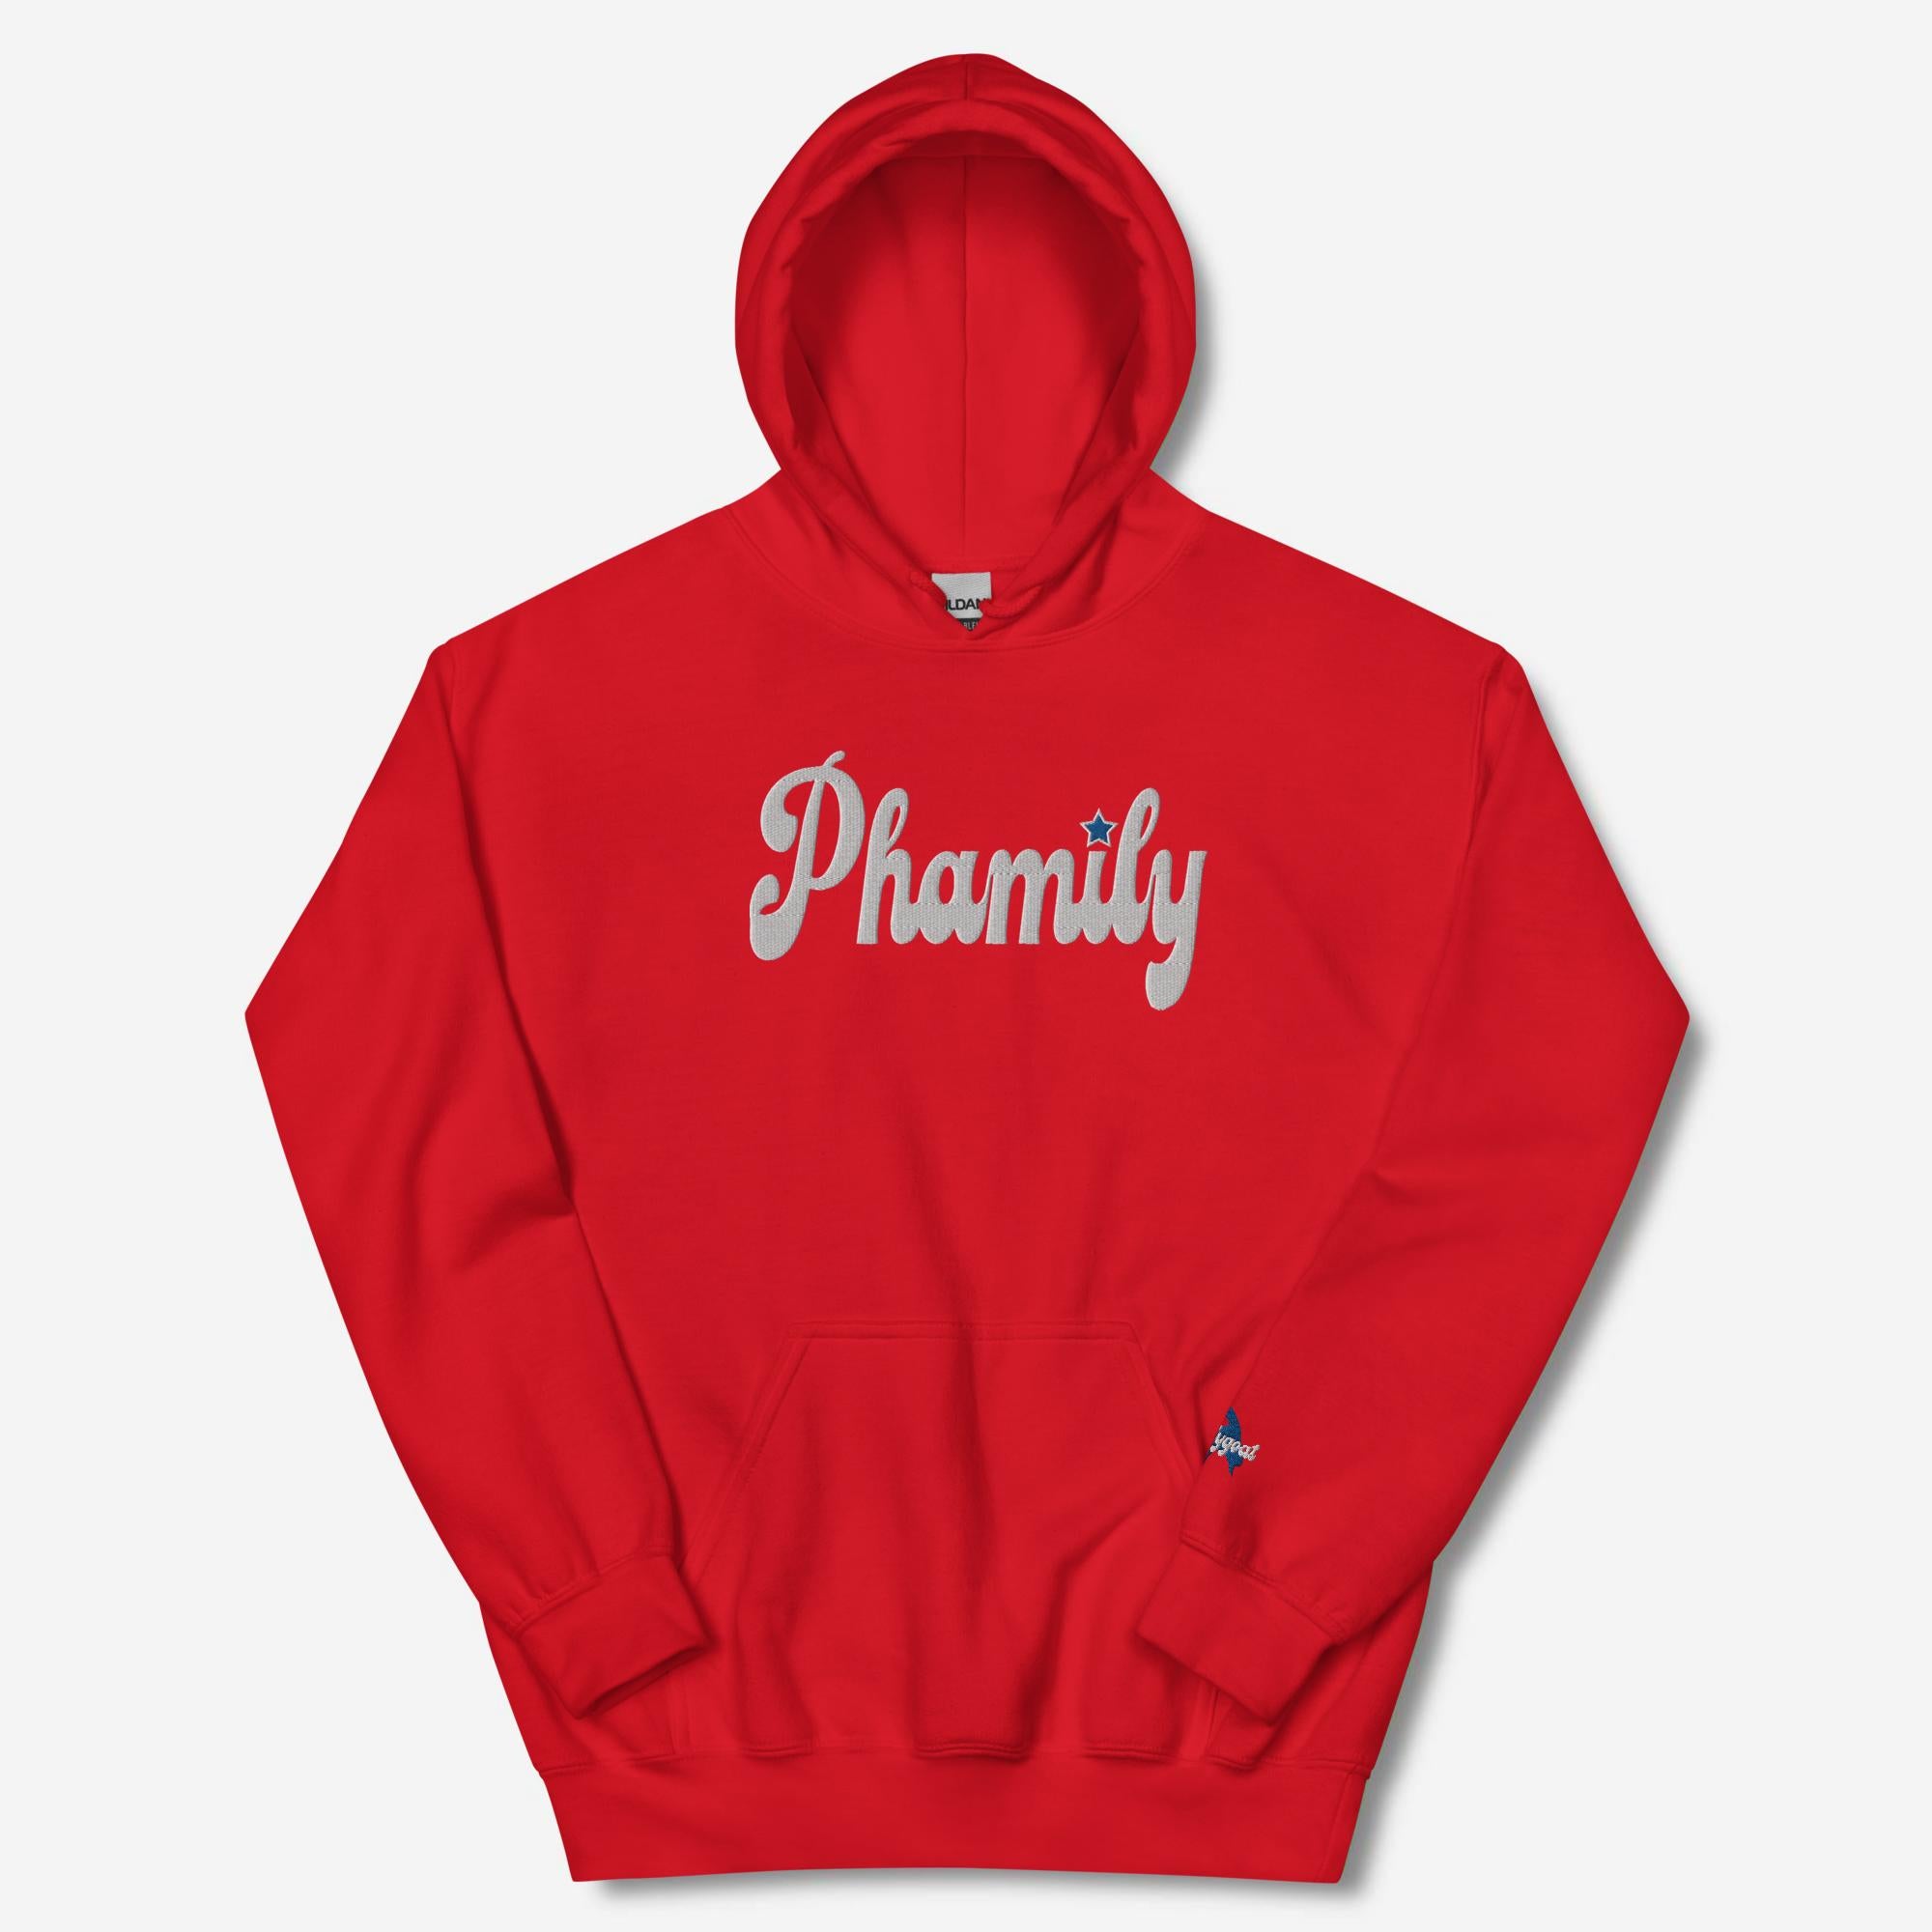 "Phamily" Embroidered Hoodie